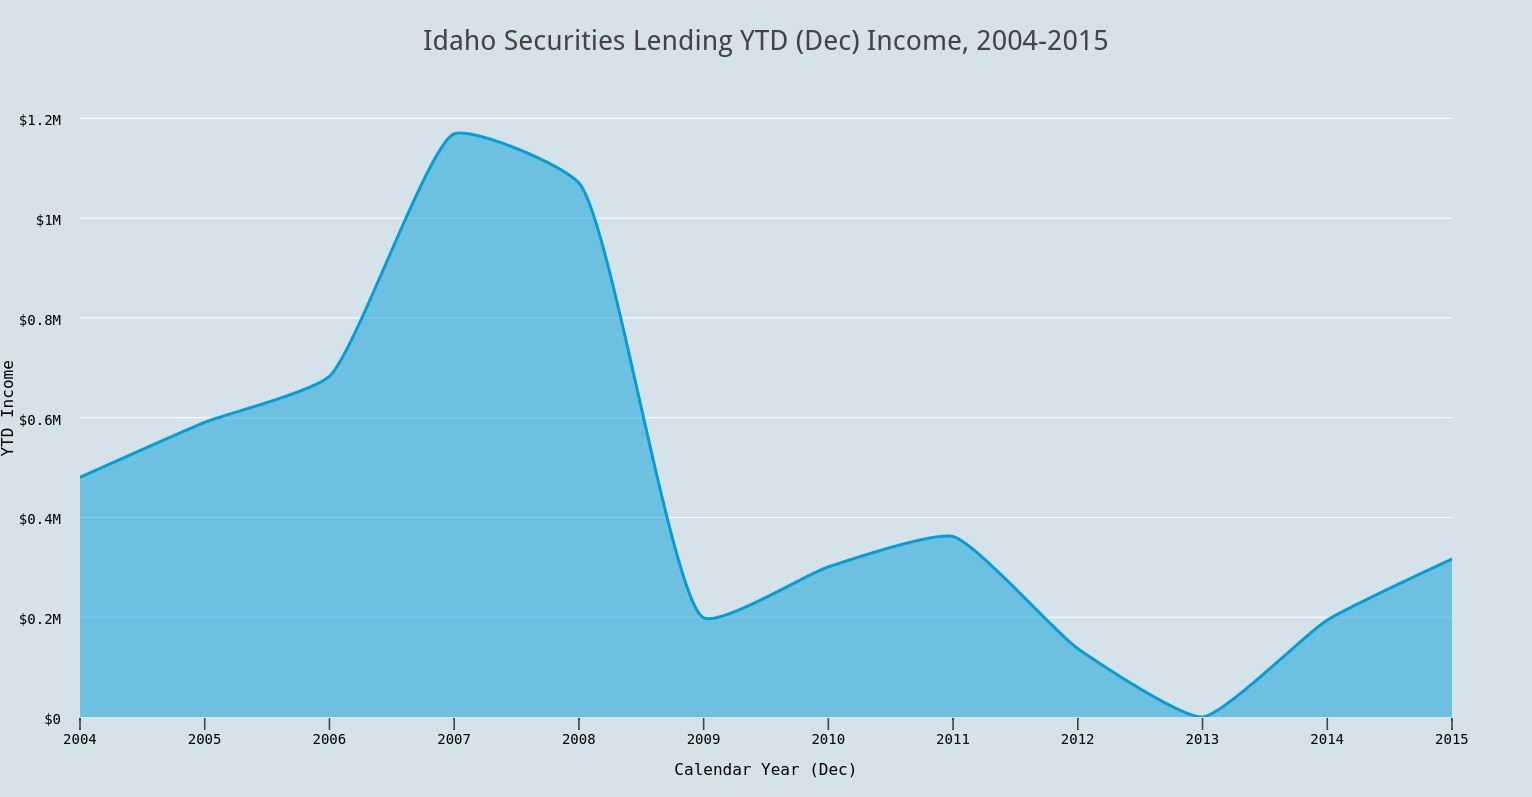 Idaho securities lending “income” as reported in December KeyBank statements. Statements do not indicate if/when the state realized this income.